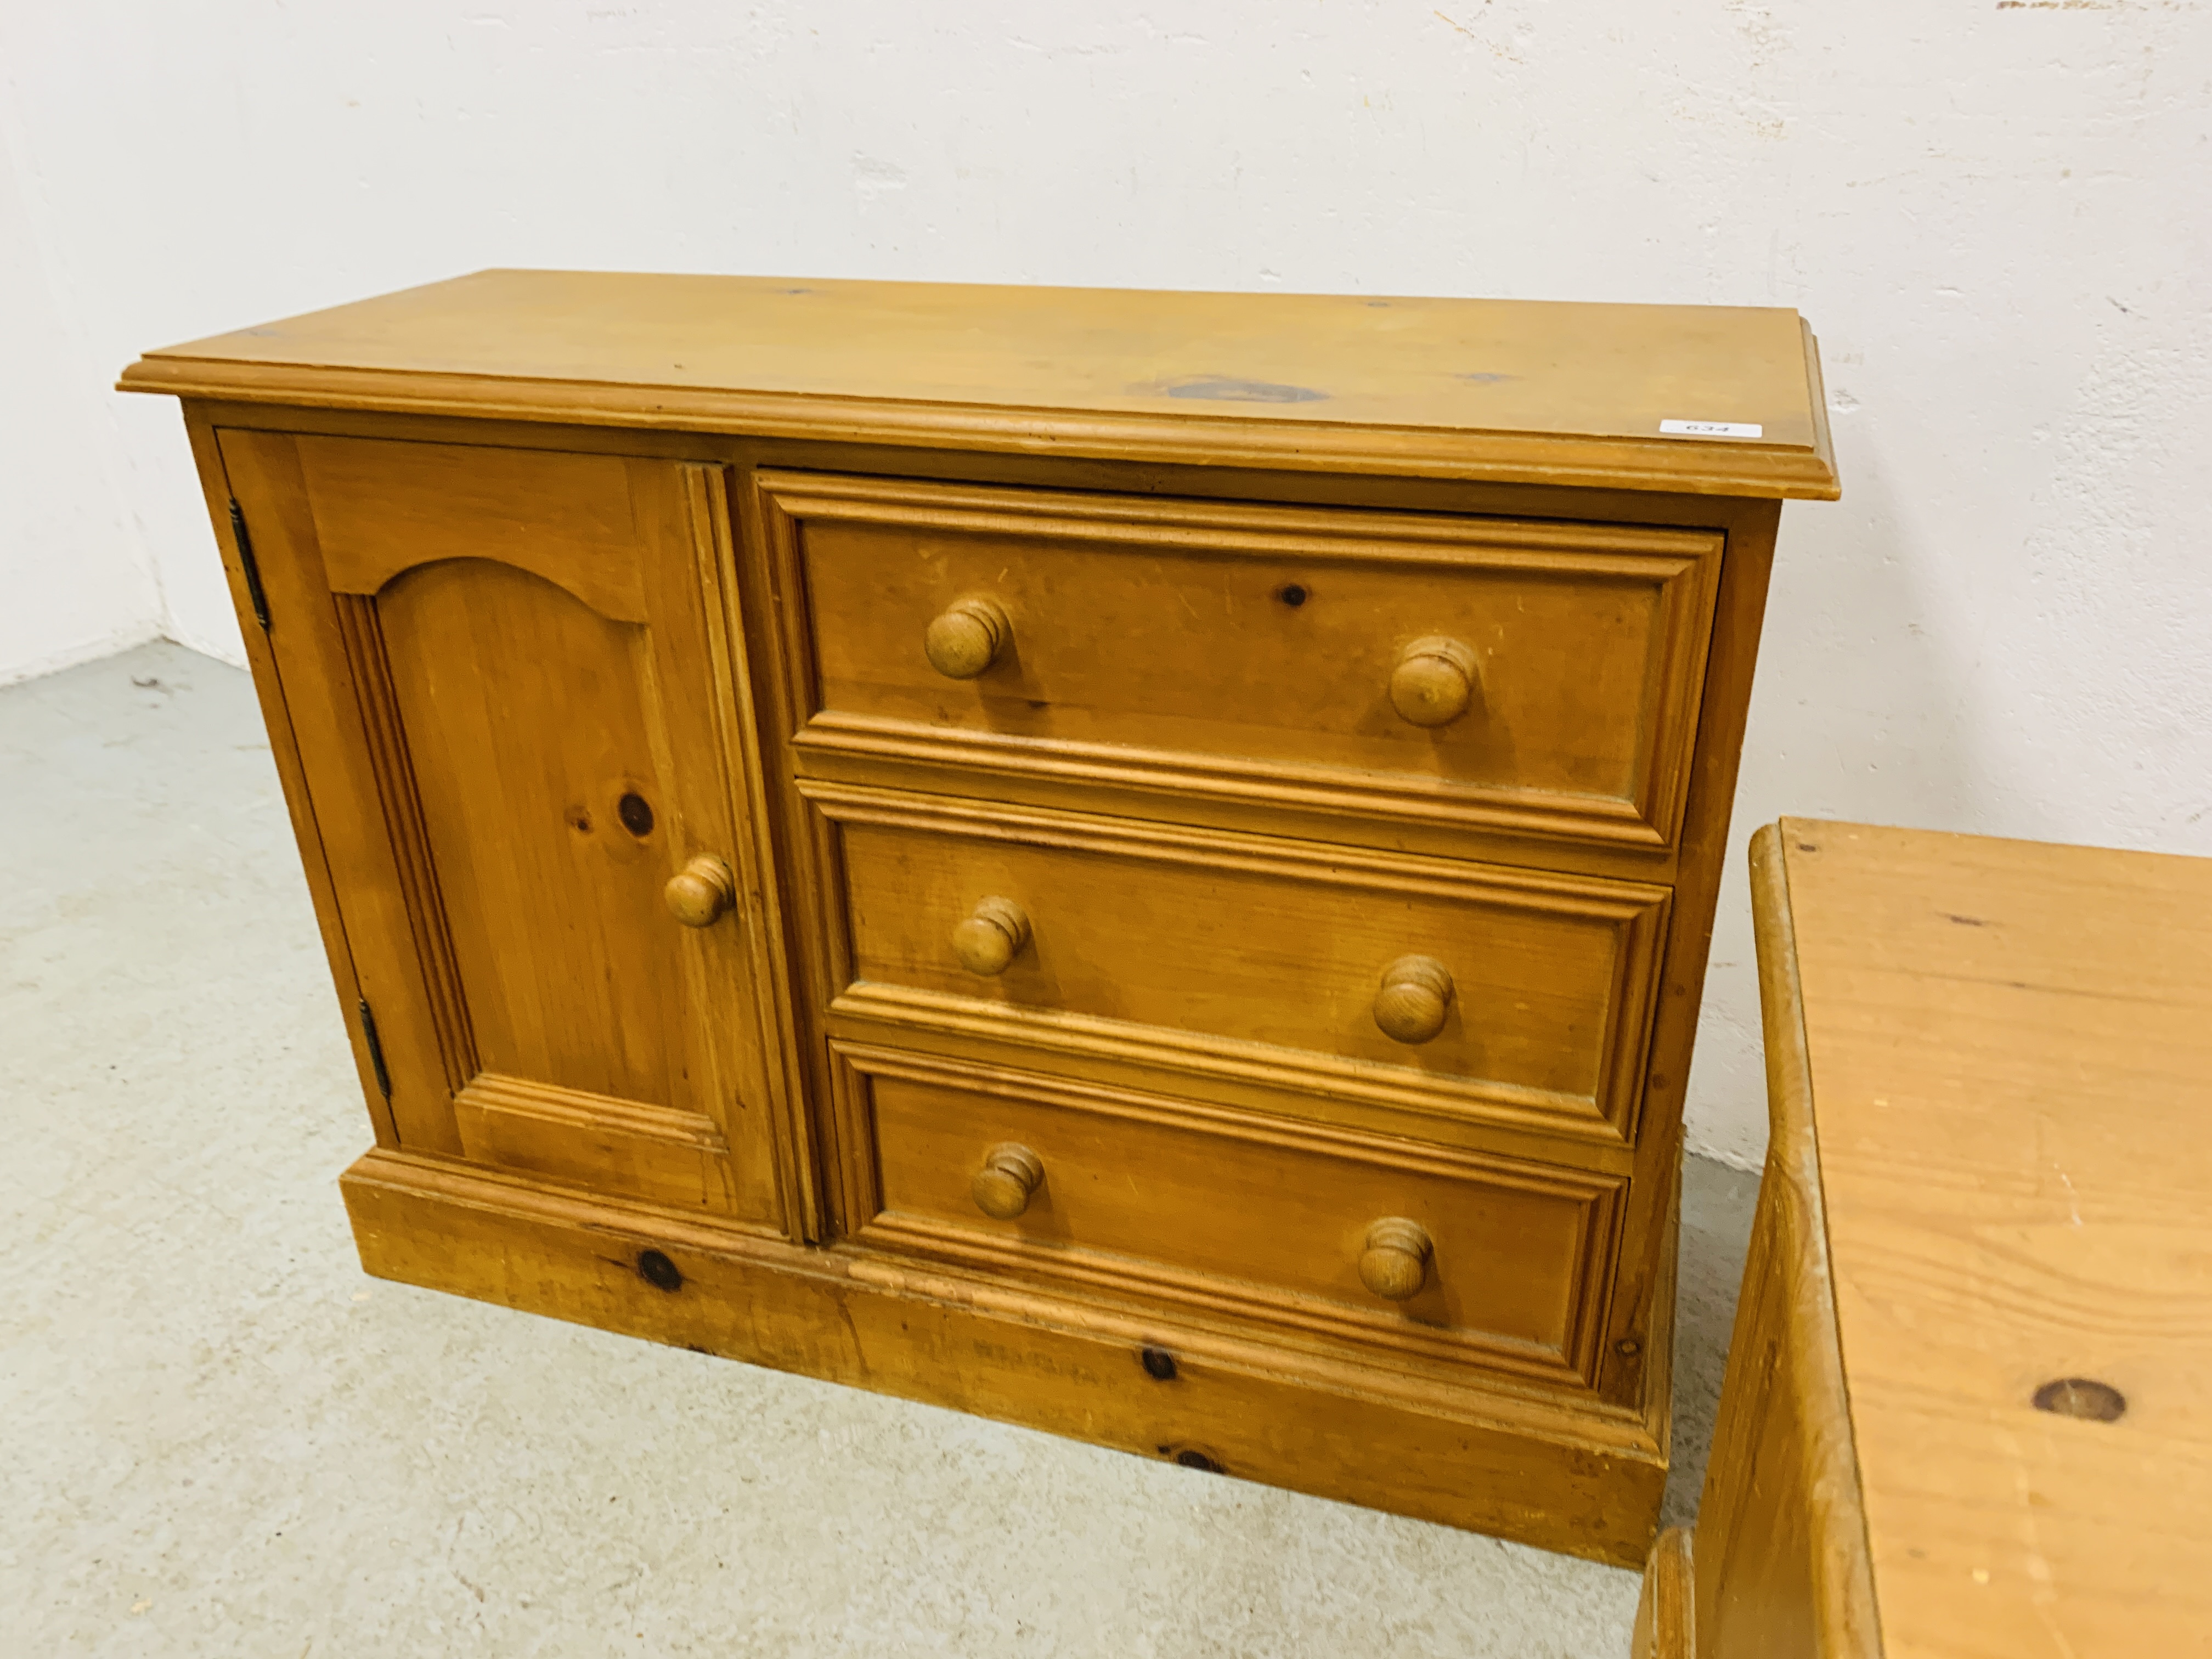 A LOW LEVEL HONEY PINE FIVE DRAWER ENTERTAINMENT STAND - W 98CM. D 42CM. H 49CM. - Image 5 of 7